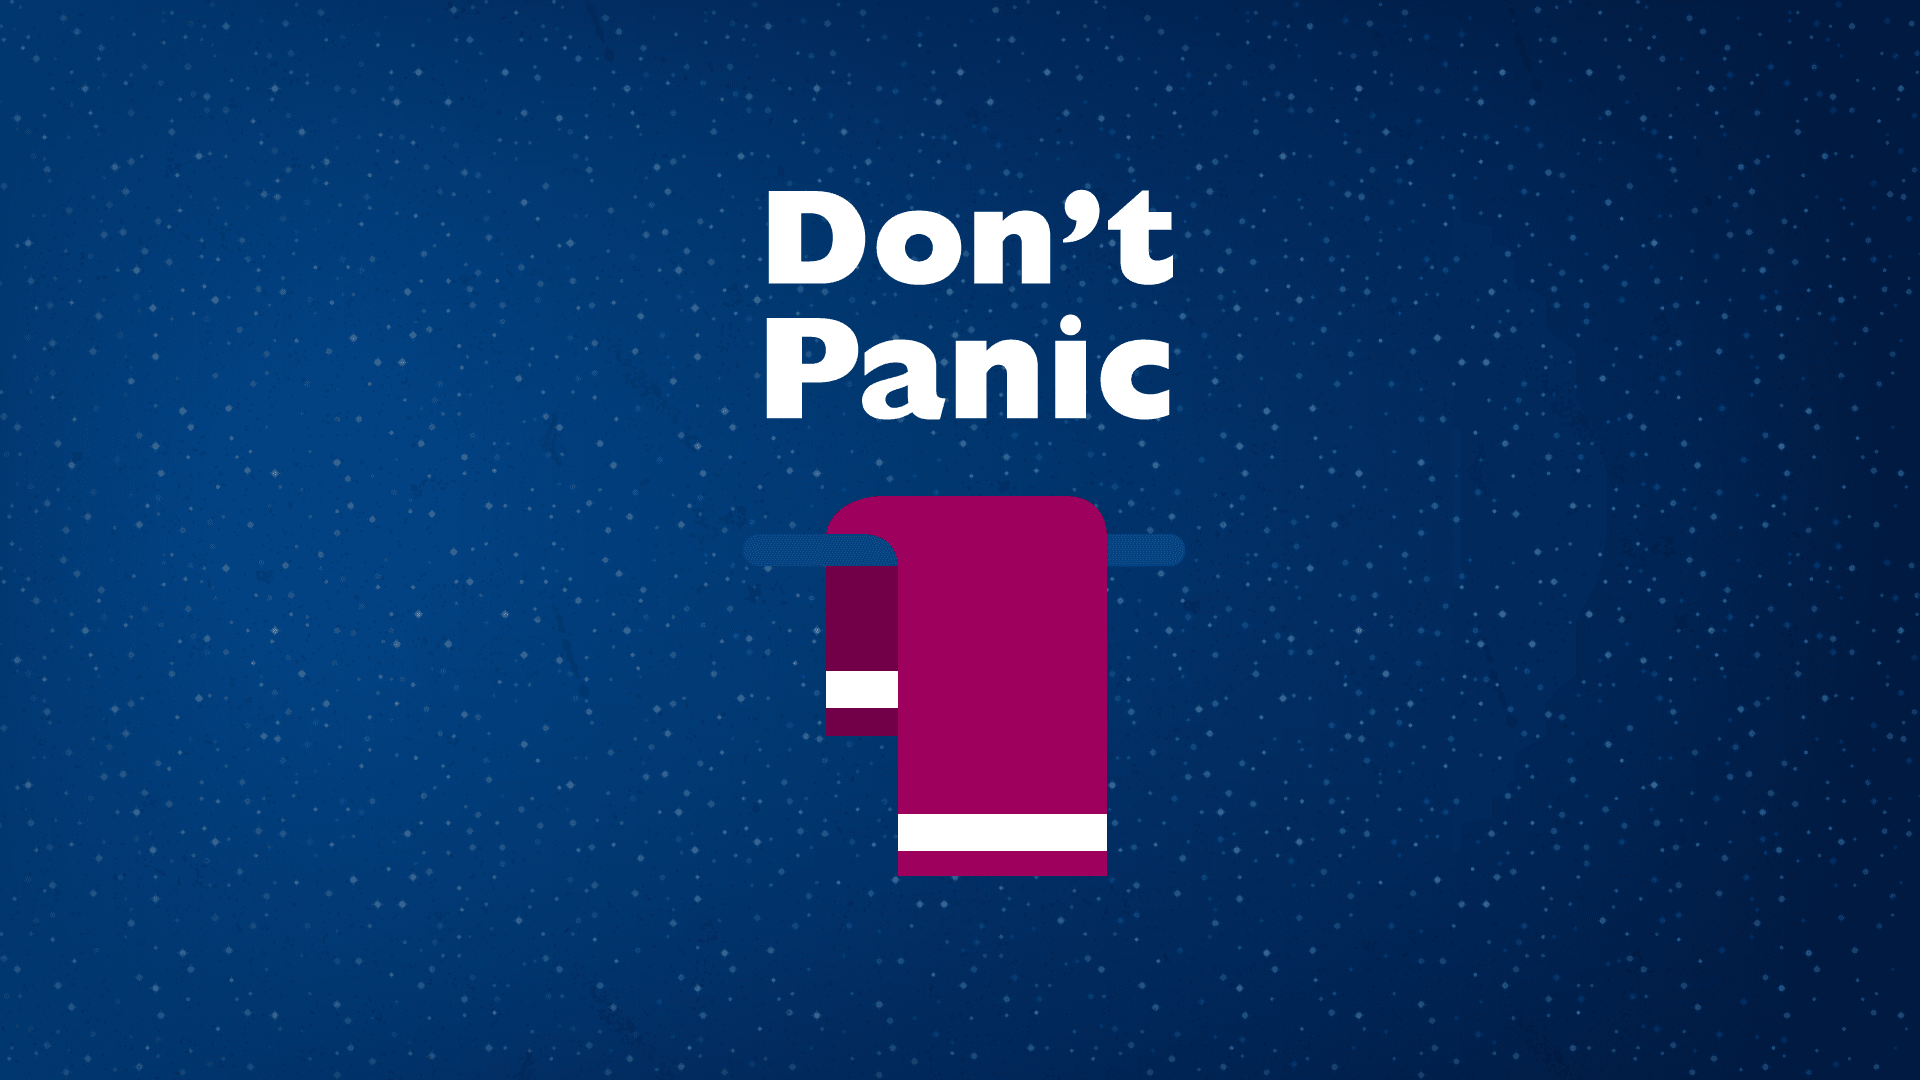 a towel with the headline Don't panic which is a reference to the book Hitchhiker's guide to the galaxy.